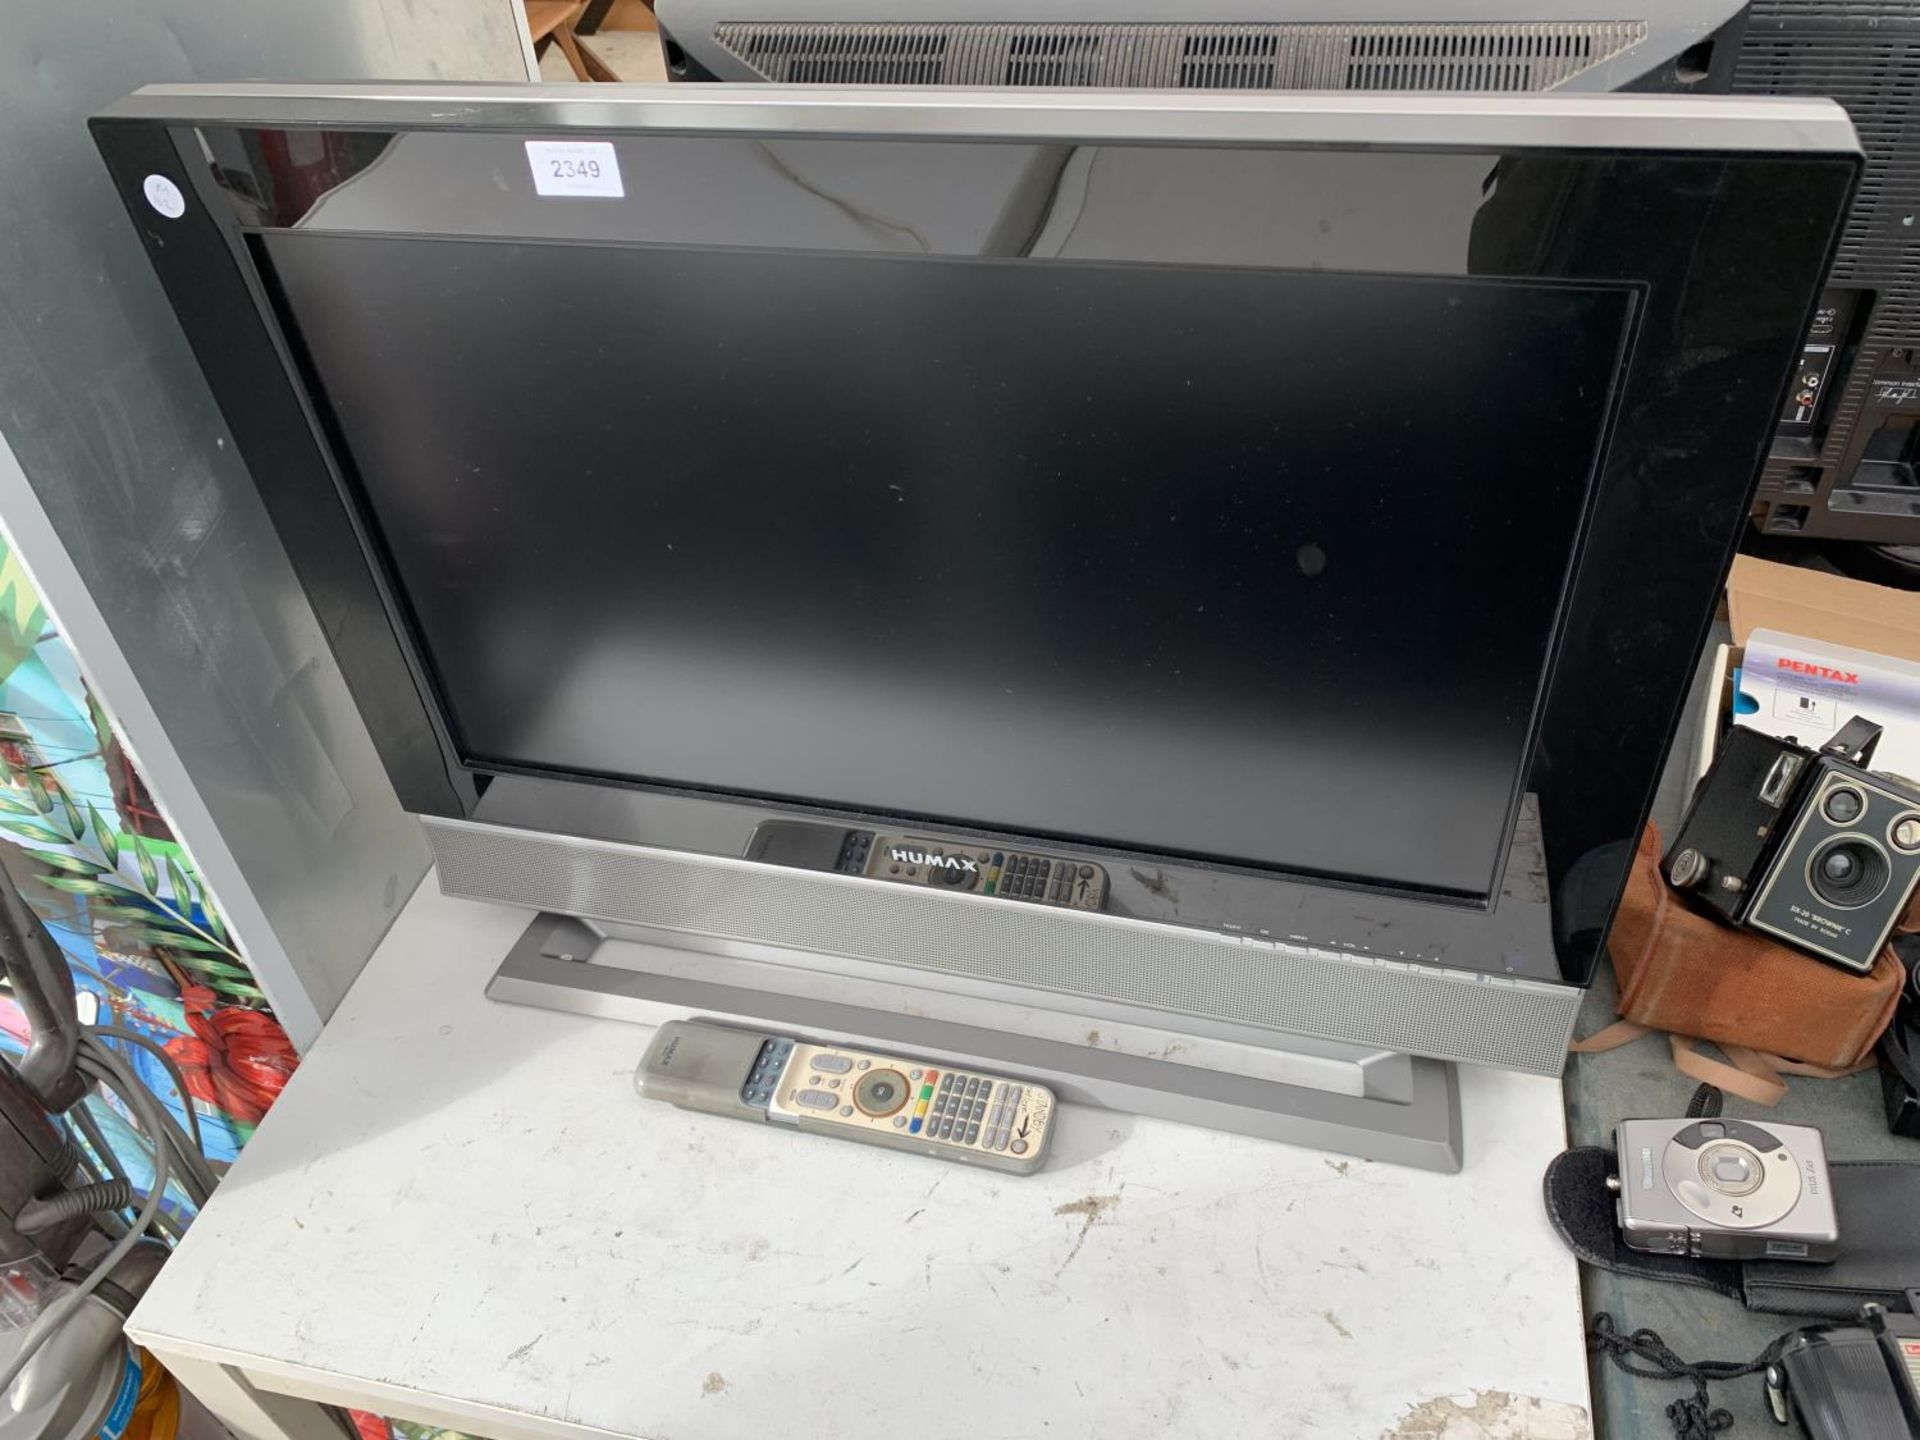 A HUMAX 26" TELEVISION WITH REMOTE CONTROL